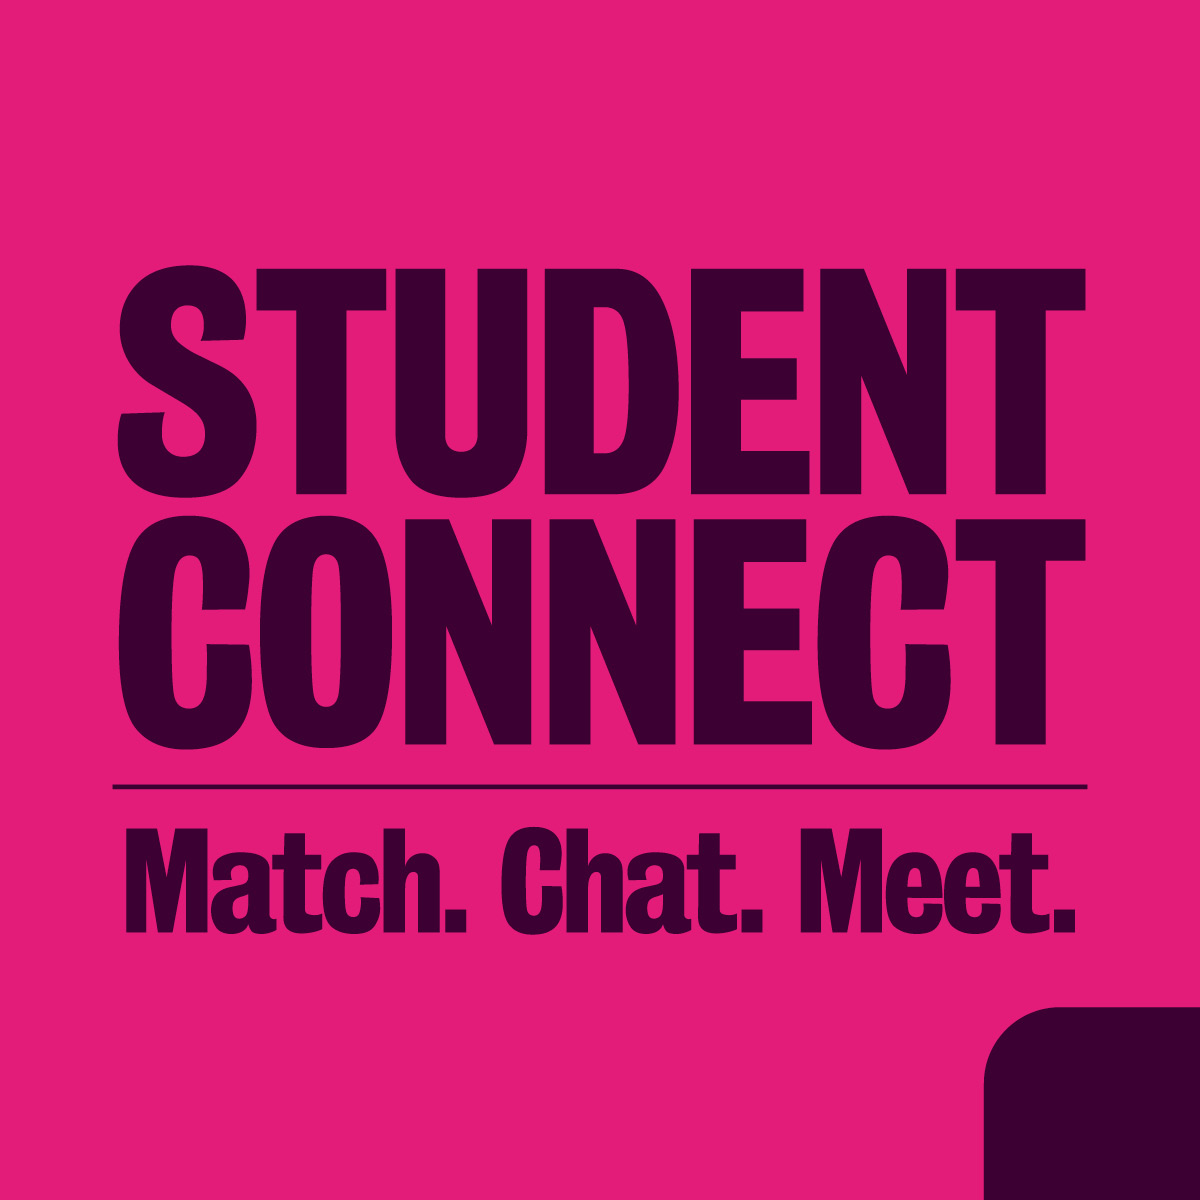 teh words Student connect, match, chat, meet on a opink background